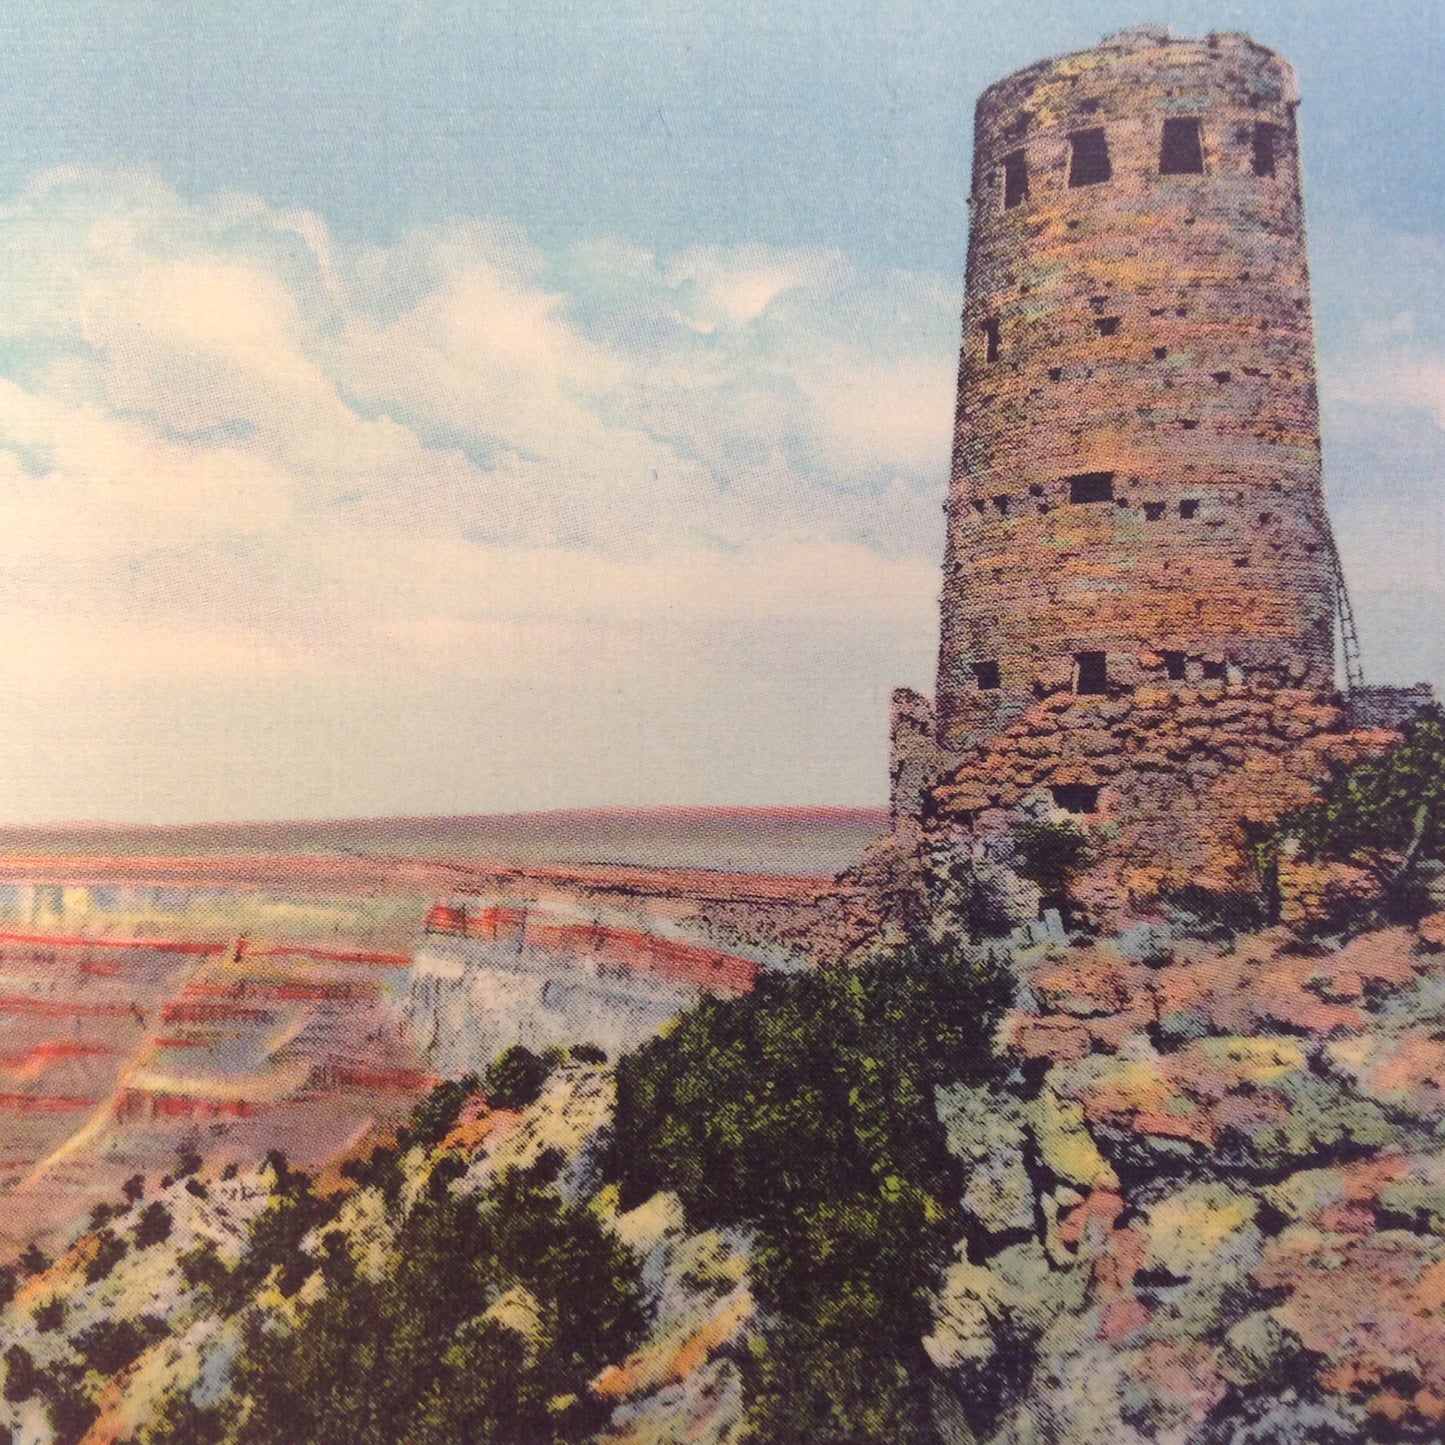 Vintage Mid Century Fred Harvey Color Postcard Watchtower at Desert View Grand Canyon National Park Arizona